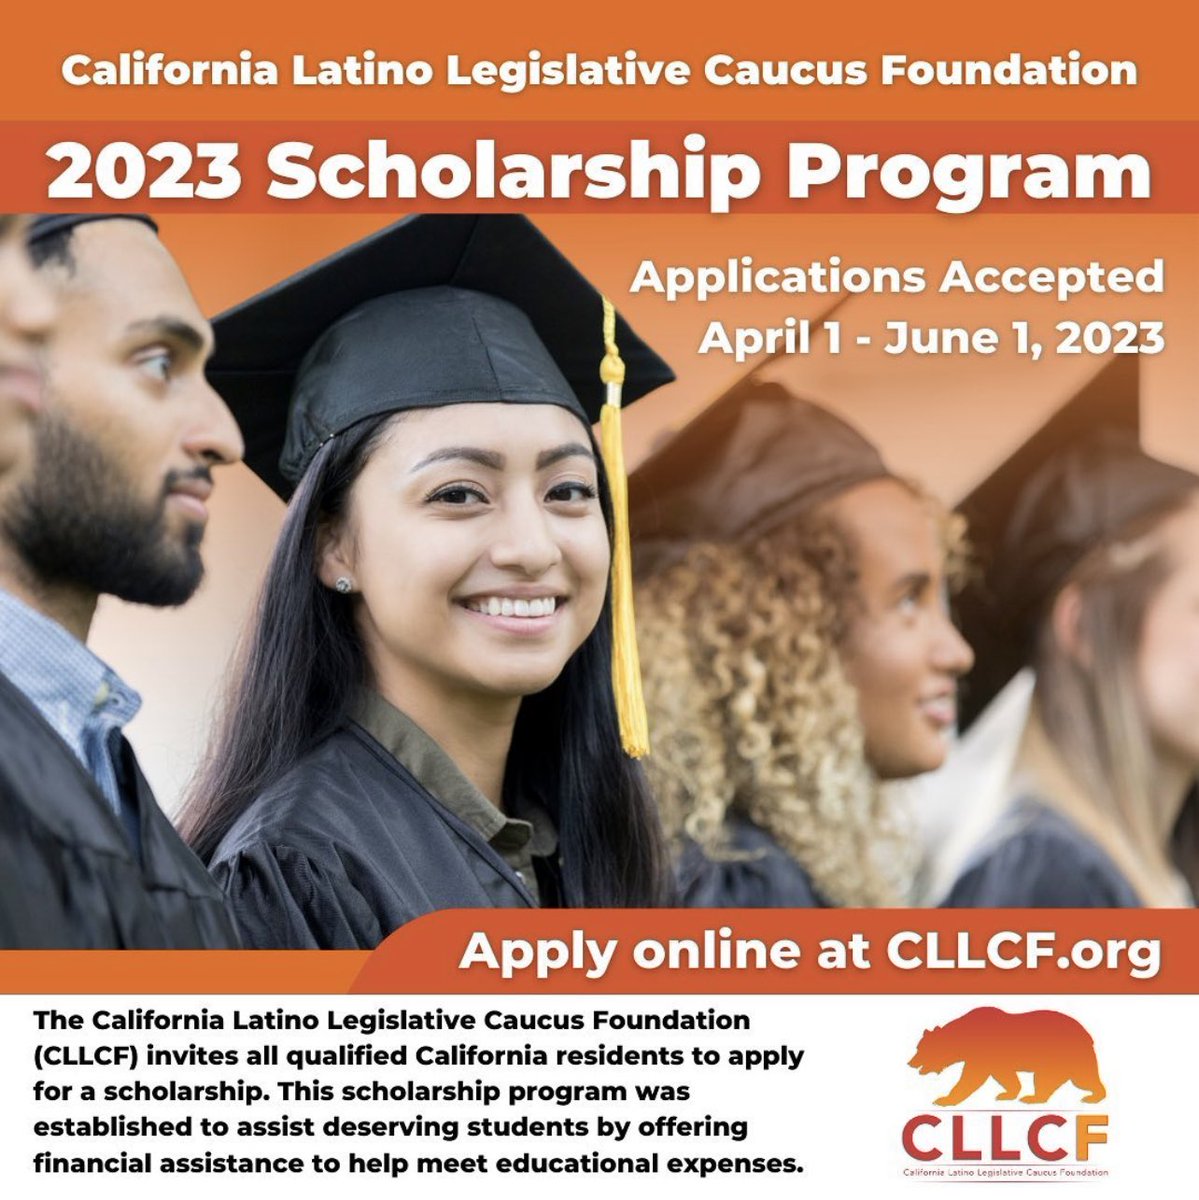 The California Latino Legislative Caucus Foundation scholarship program is now accepting applications. All students selected will receive a $5,000 scholarship to help with educational expenses. For more details, visit: 
cllcf.org/scholarship-pr…